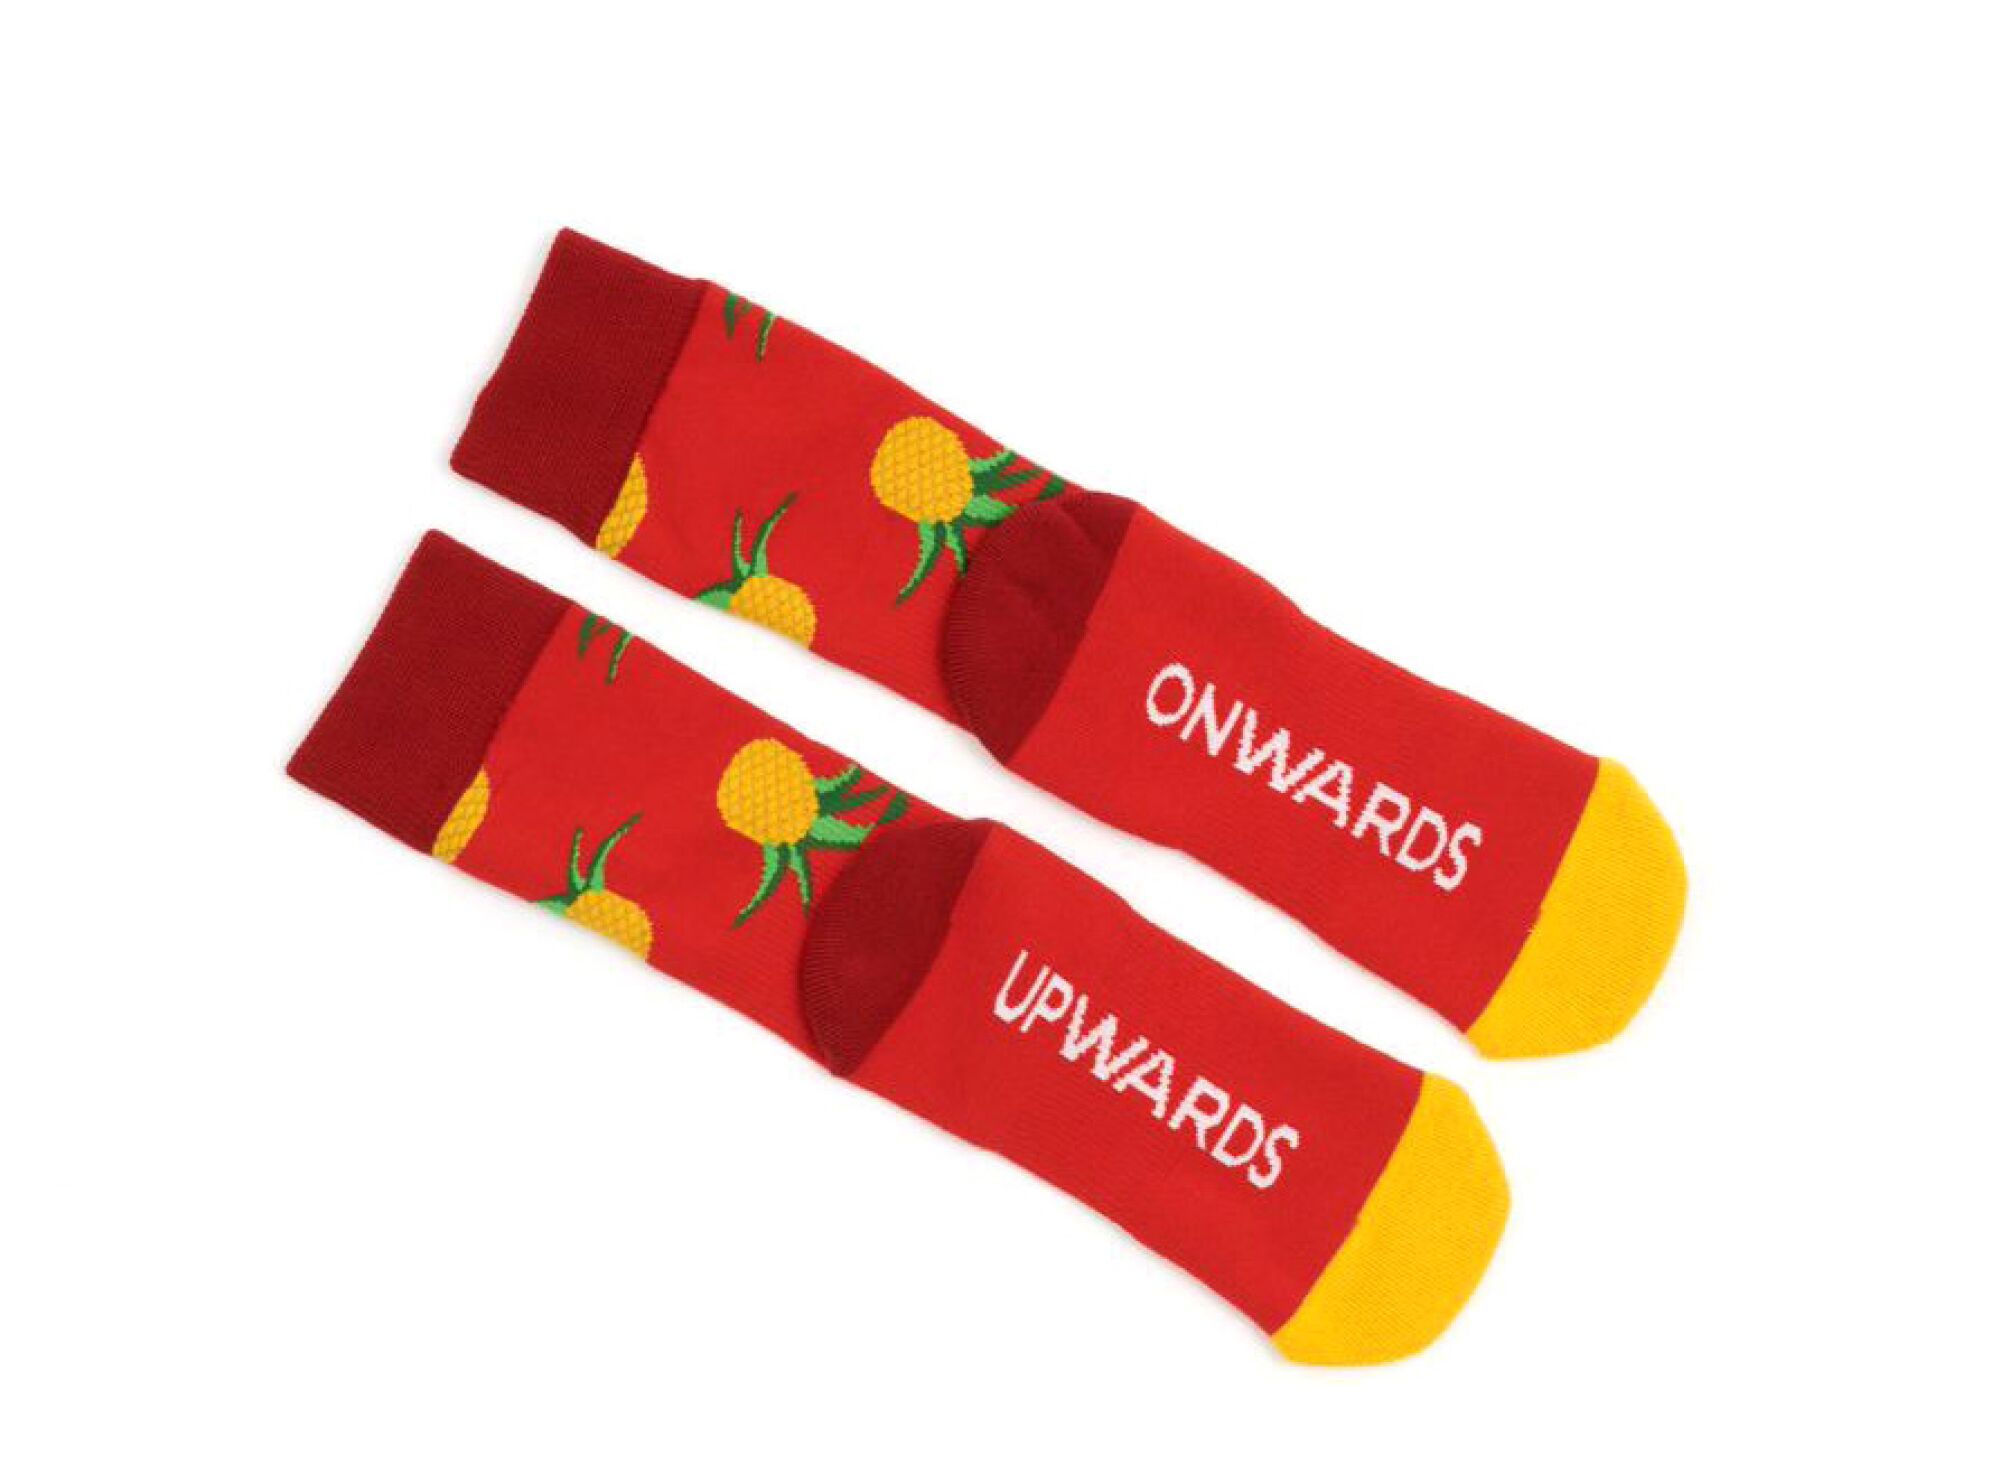 A colorful pair of socks with pineapples and the words "onwards" and "upwards."